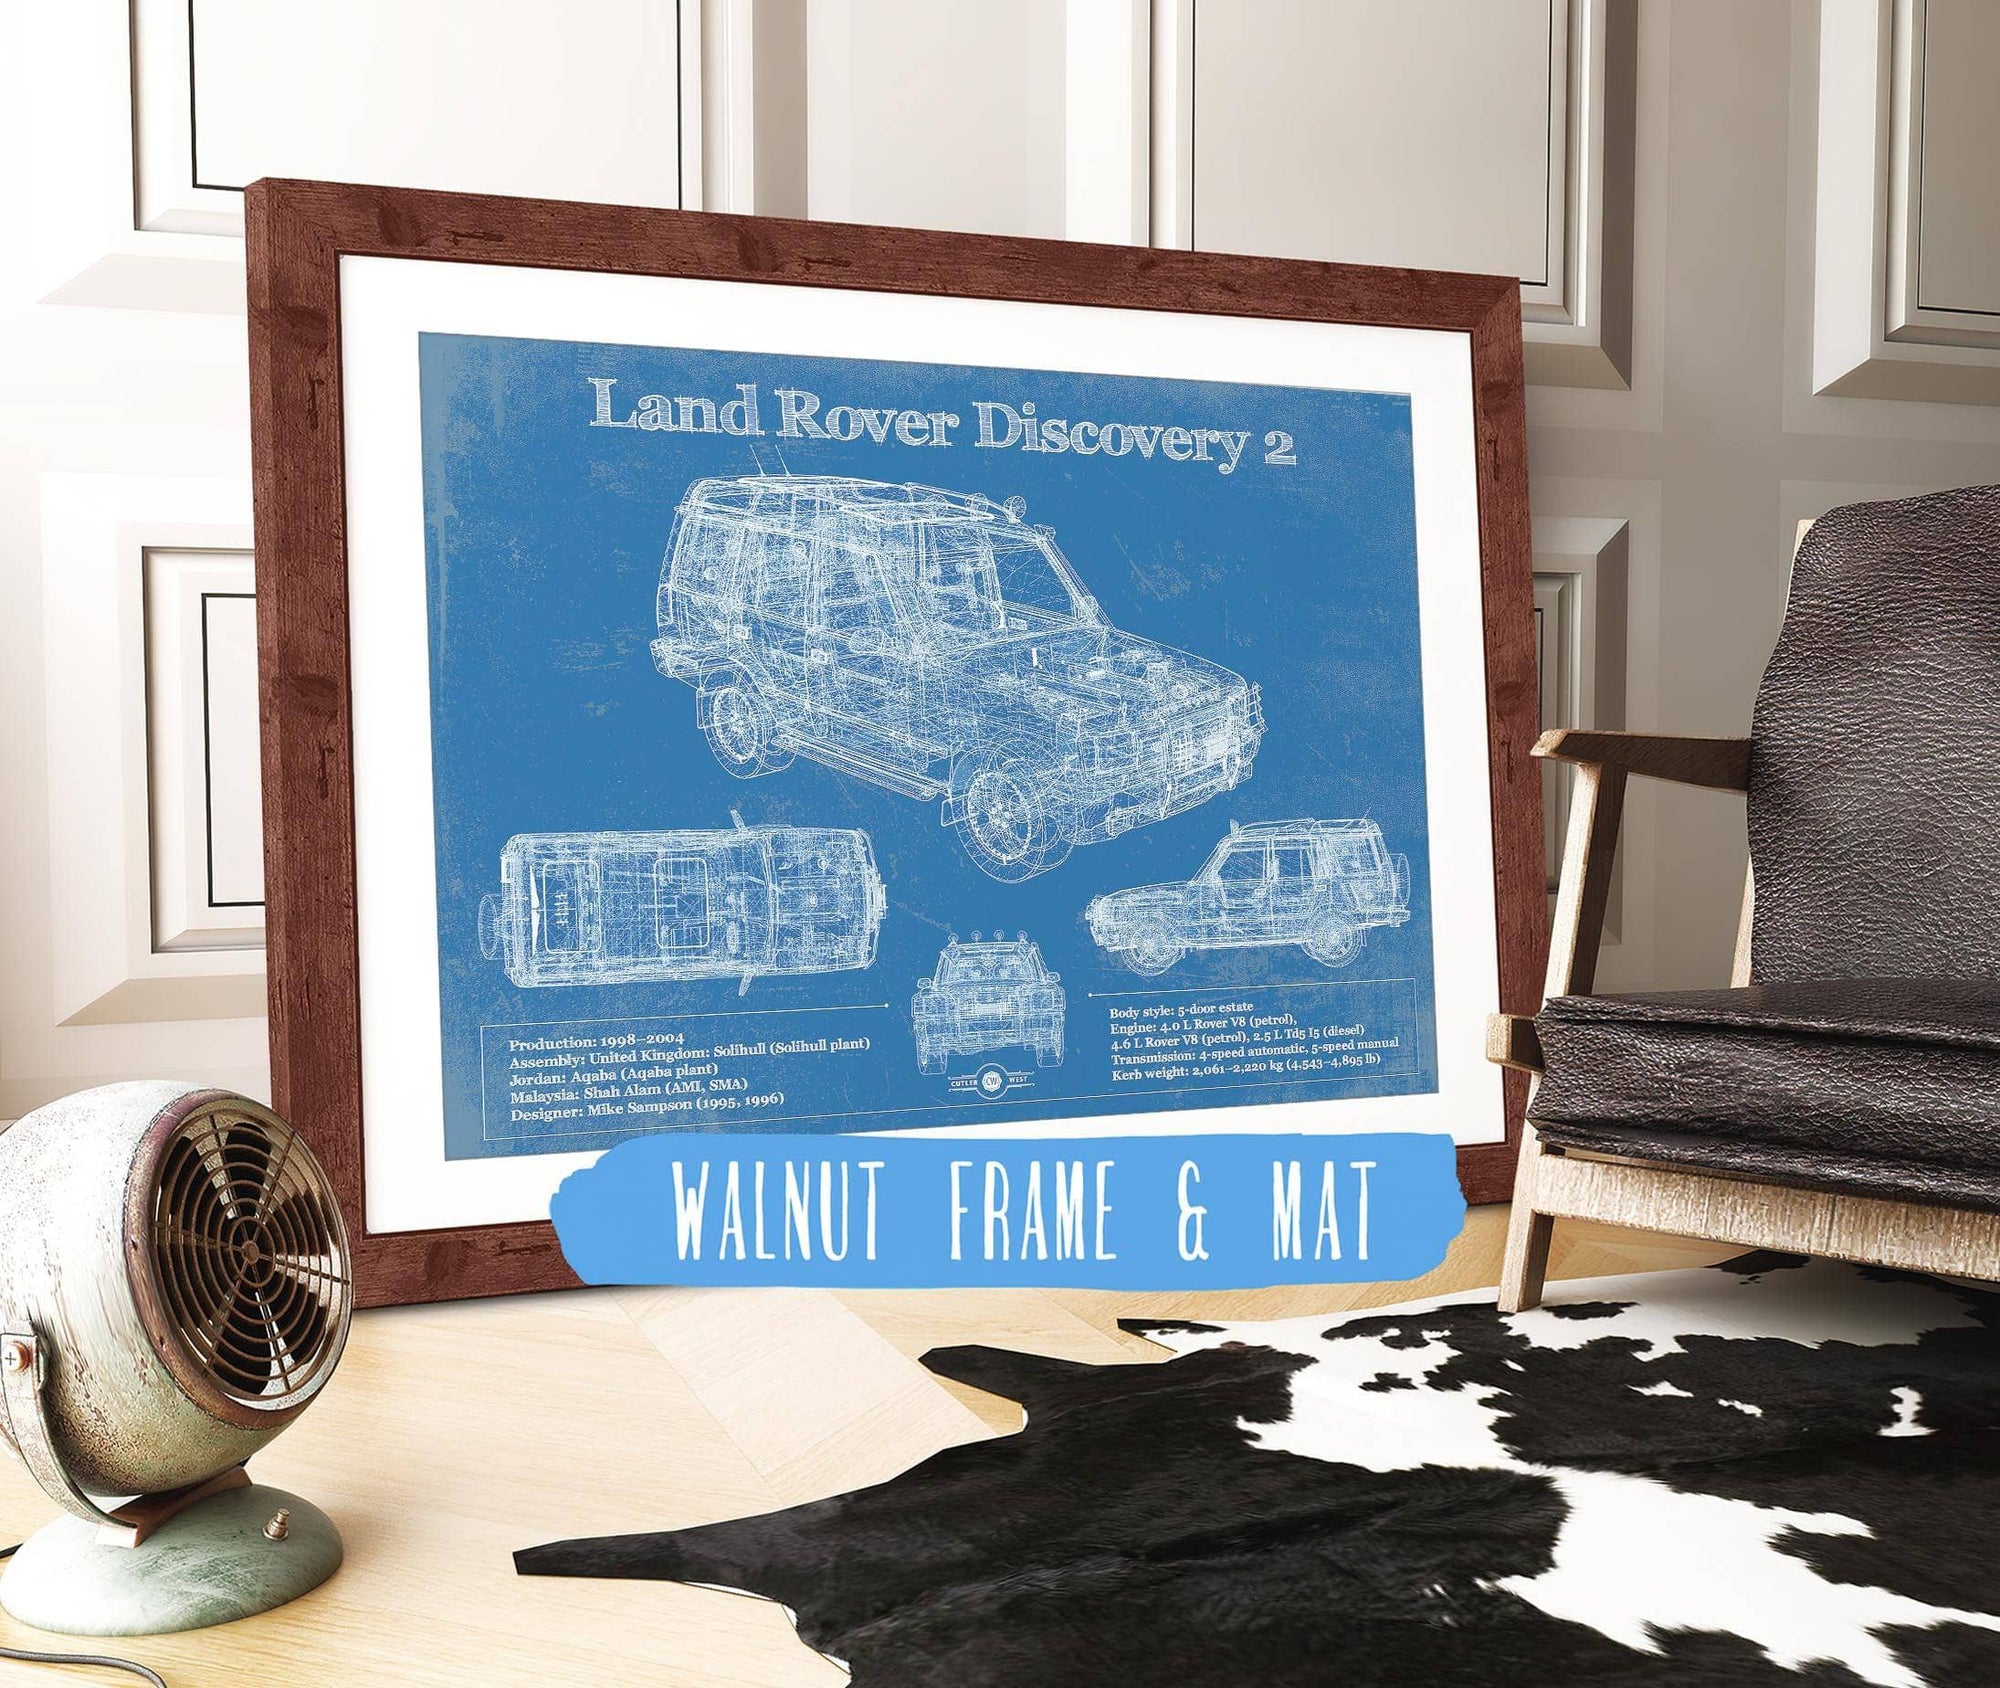 Cutler West Land Rover Discovery Series 2 Blueprint Vintage Auto Patent Print